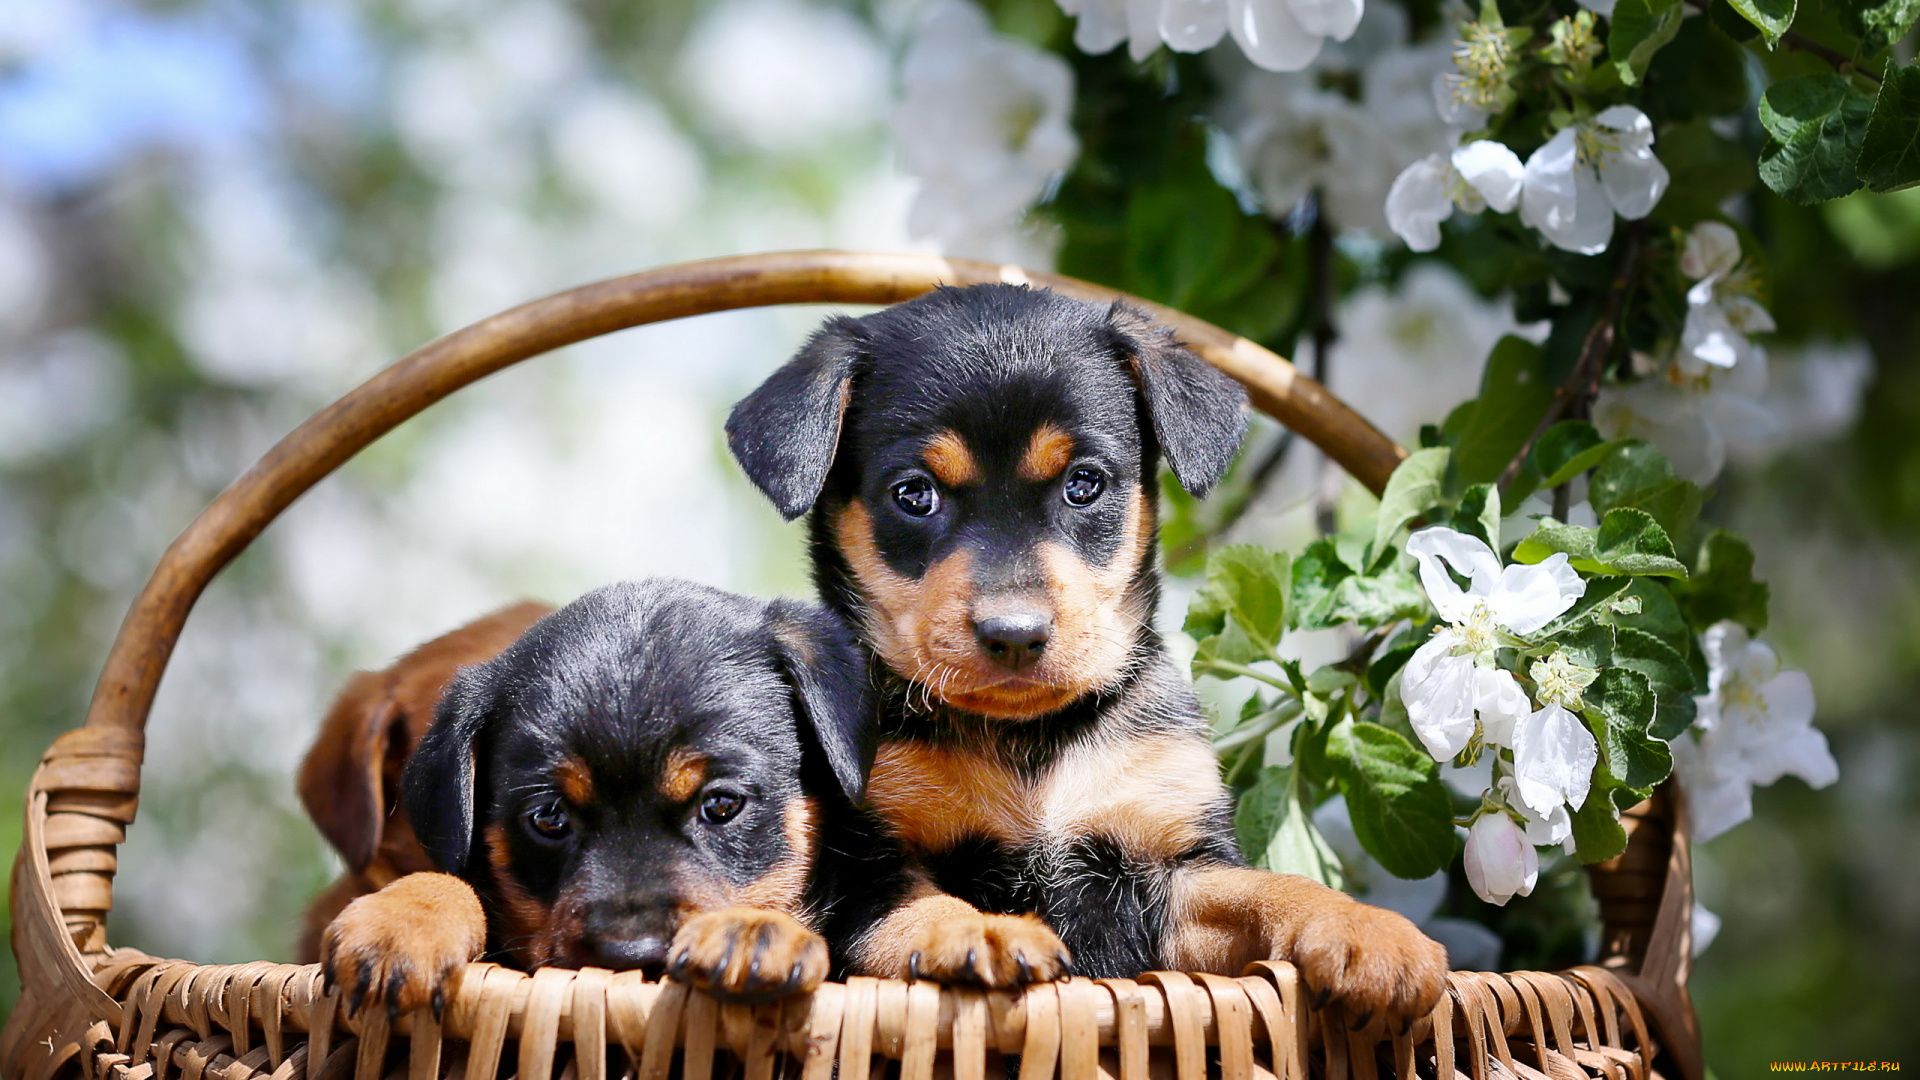 The Puppies In The Basket Pictures